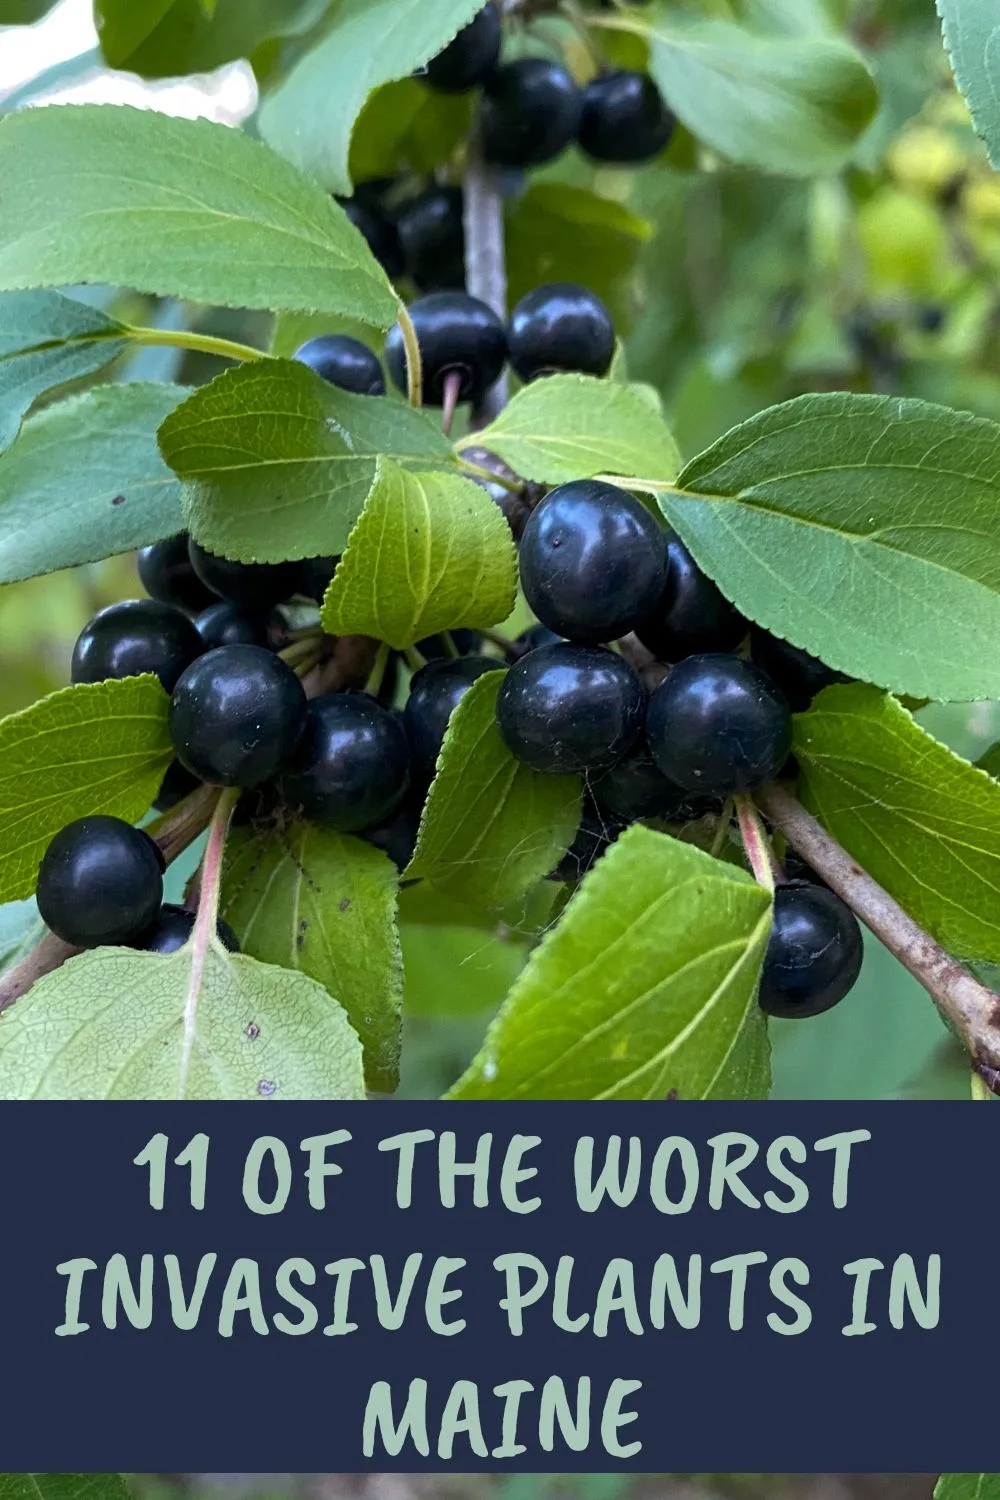 11 of the most invasive plants in Maine.